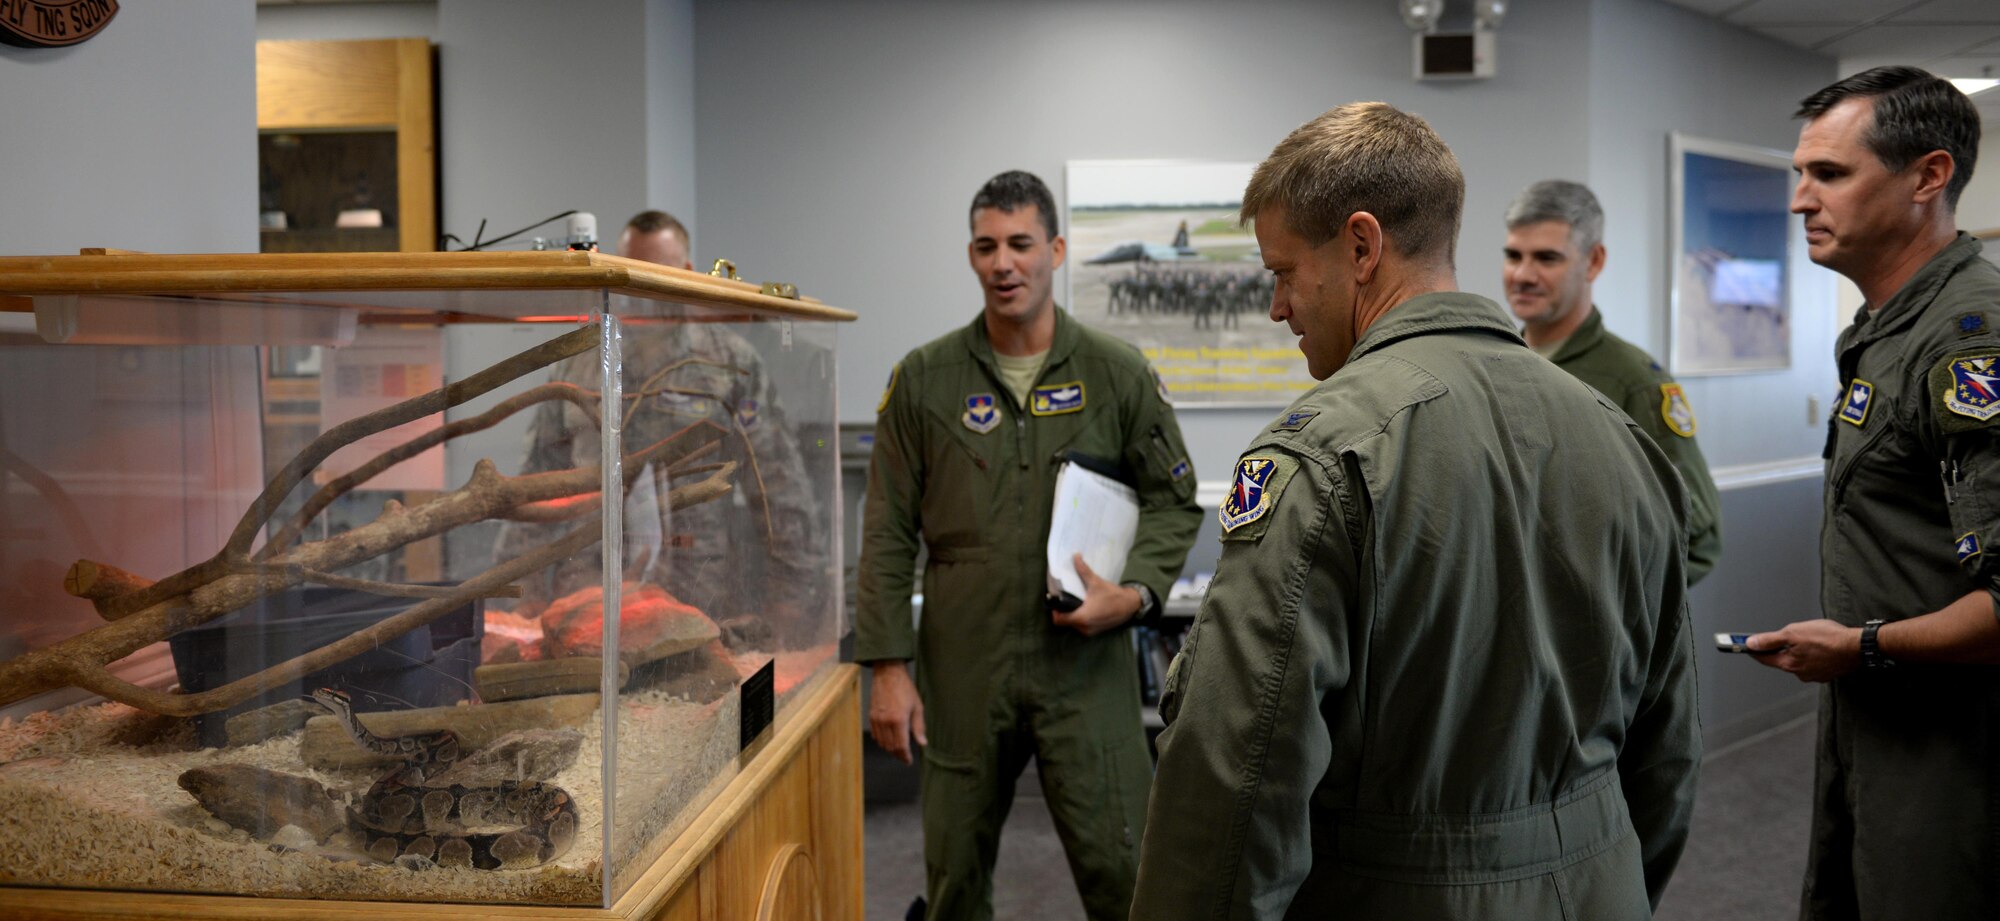 Col. William Denham, 14th Flying Training Wing Vice Commander is shown the 50th Flying Training Squadrons’ pet snake. The 50th FTS is responsible for giving student pilots advanced aircraft handling skills, tactical navigation abilities and more.